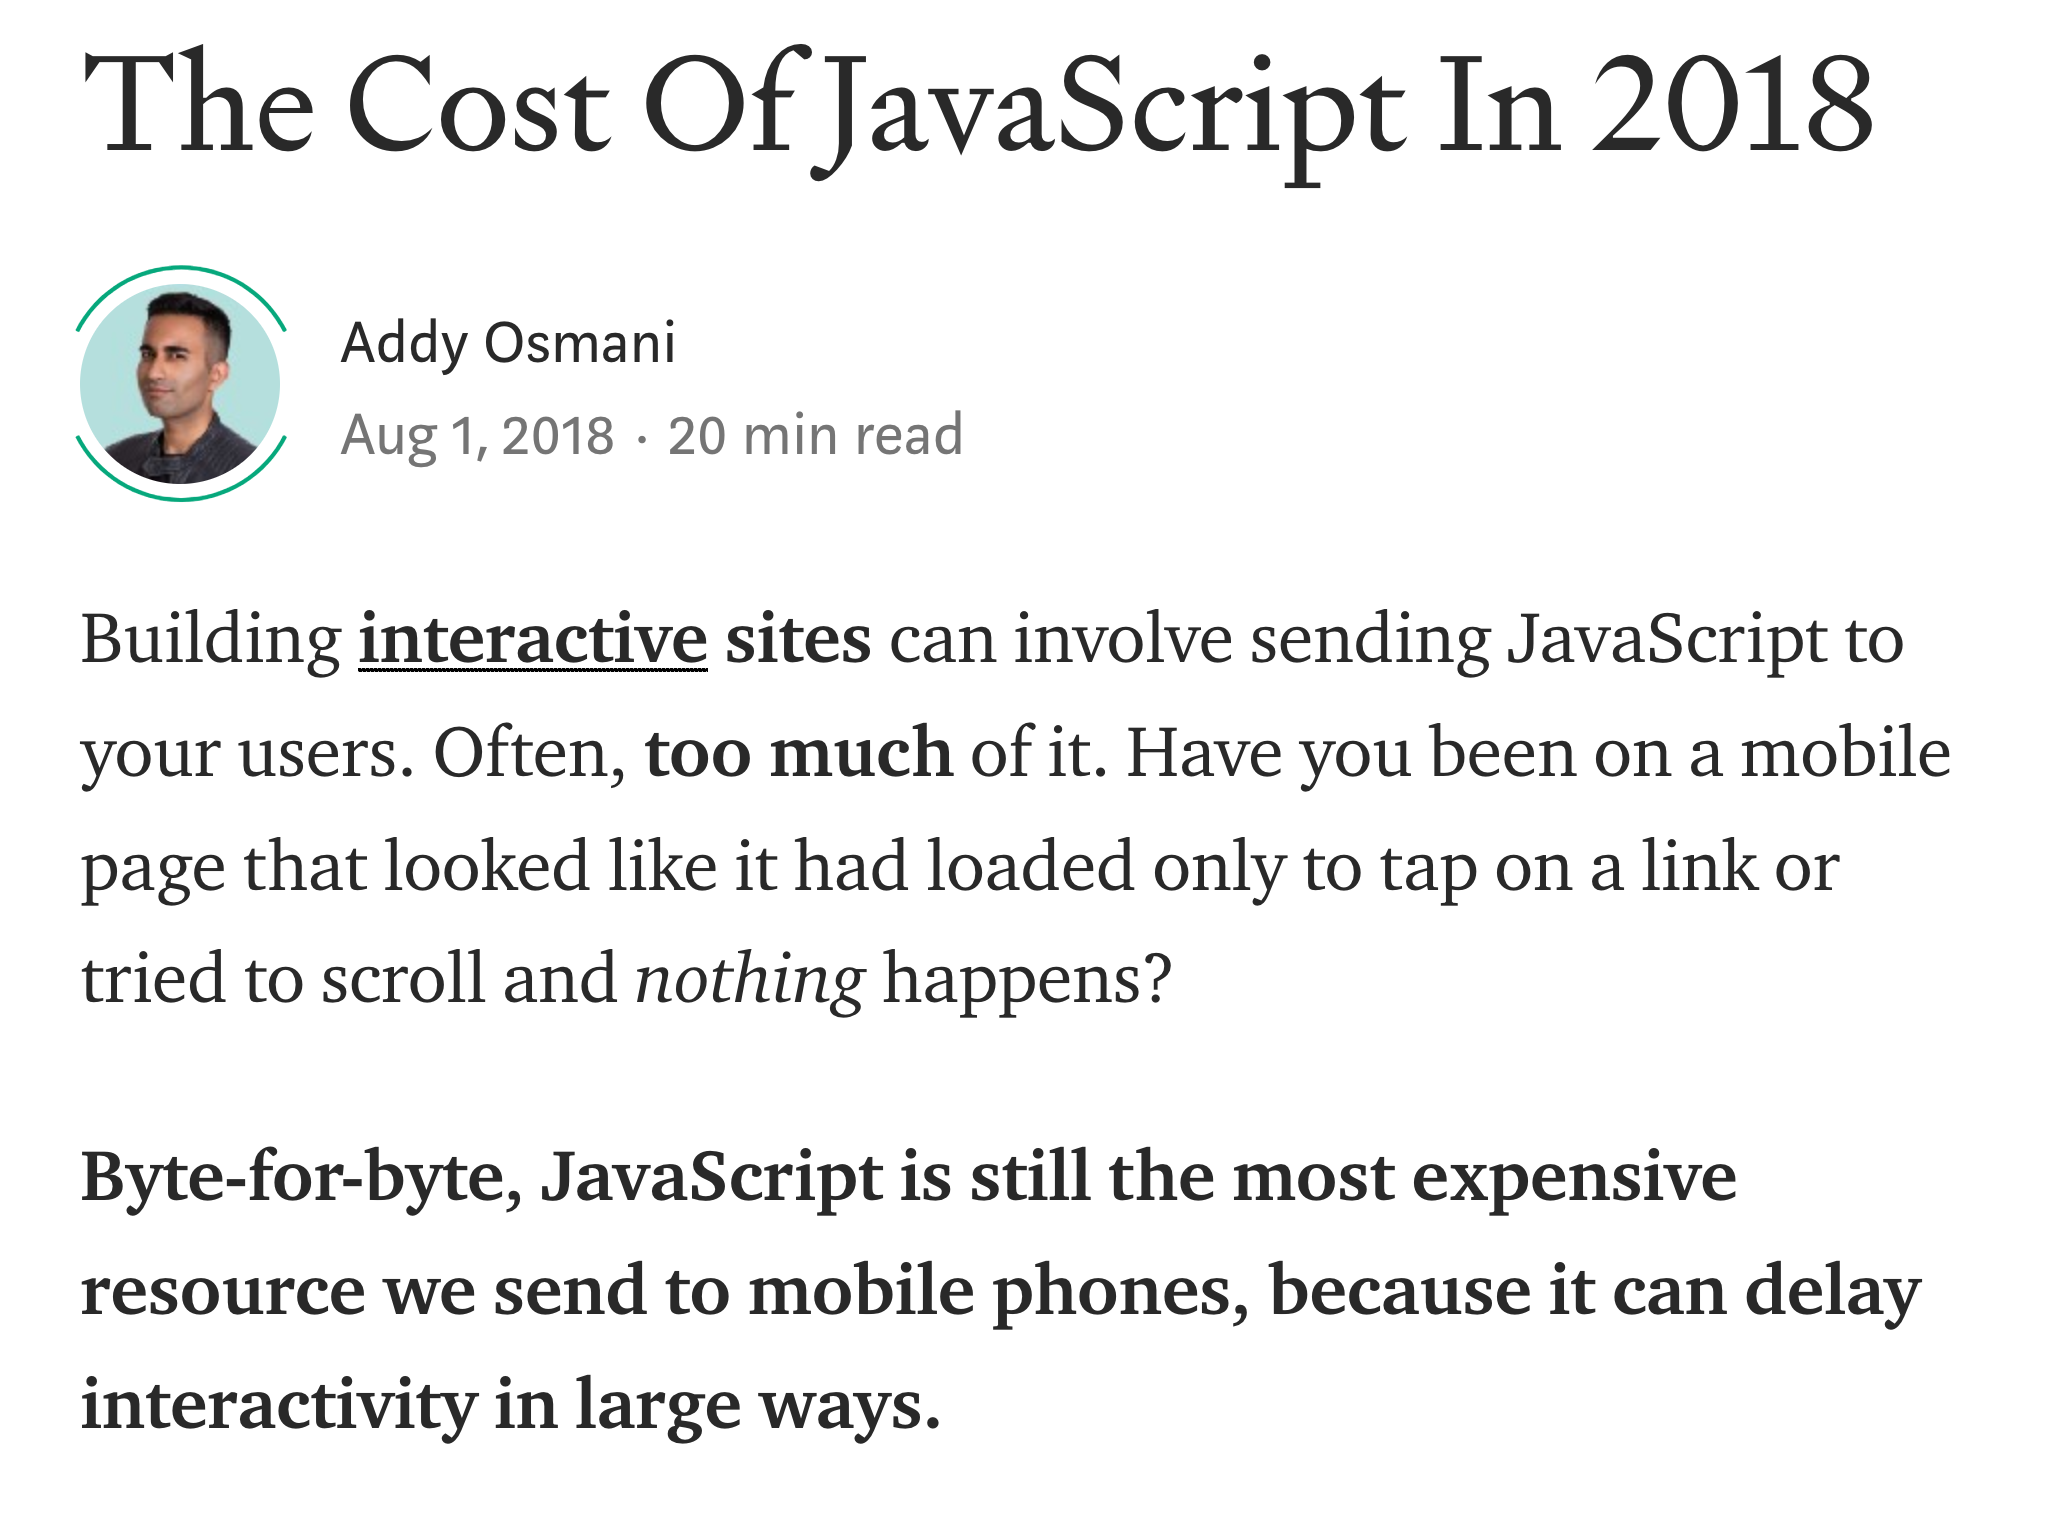 The Cost of JavaScript